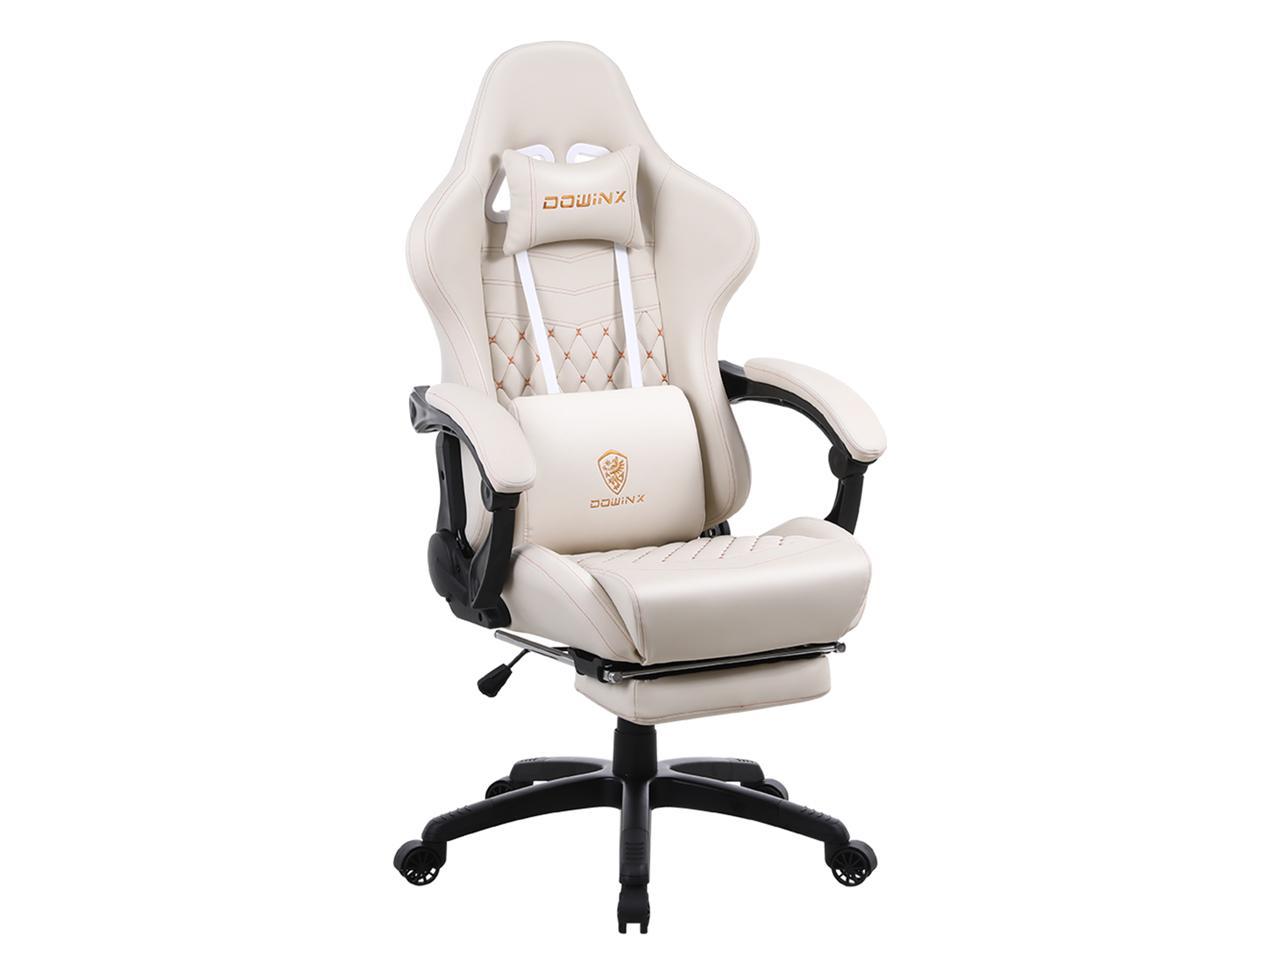 DOWINX Gaming Chair Office Desk Chair with Massage Lumbar